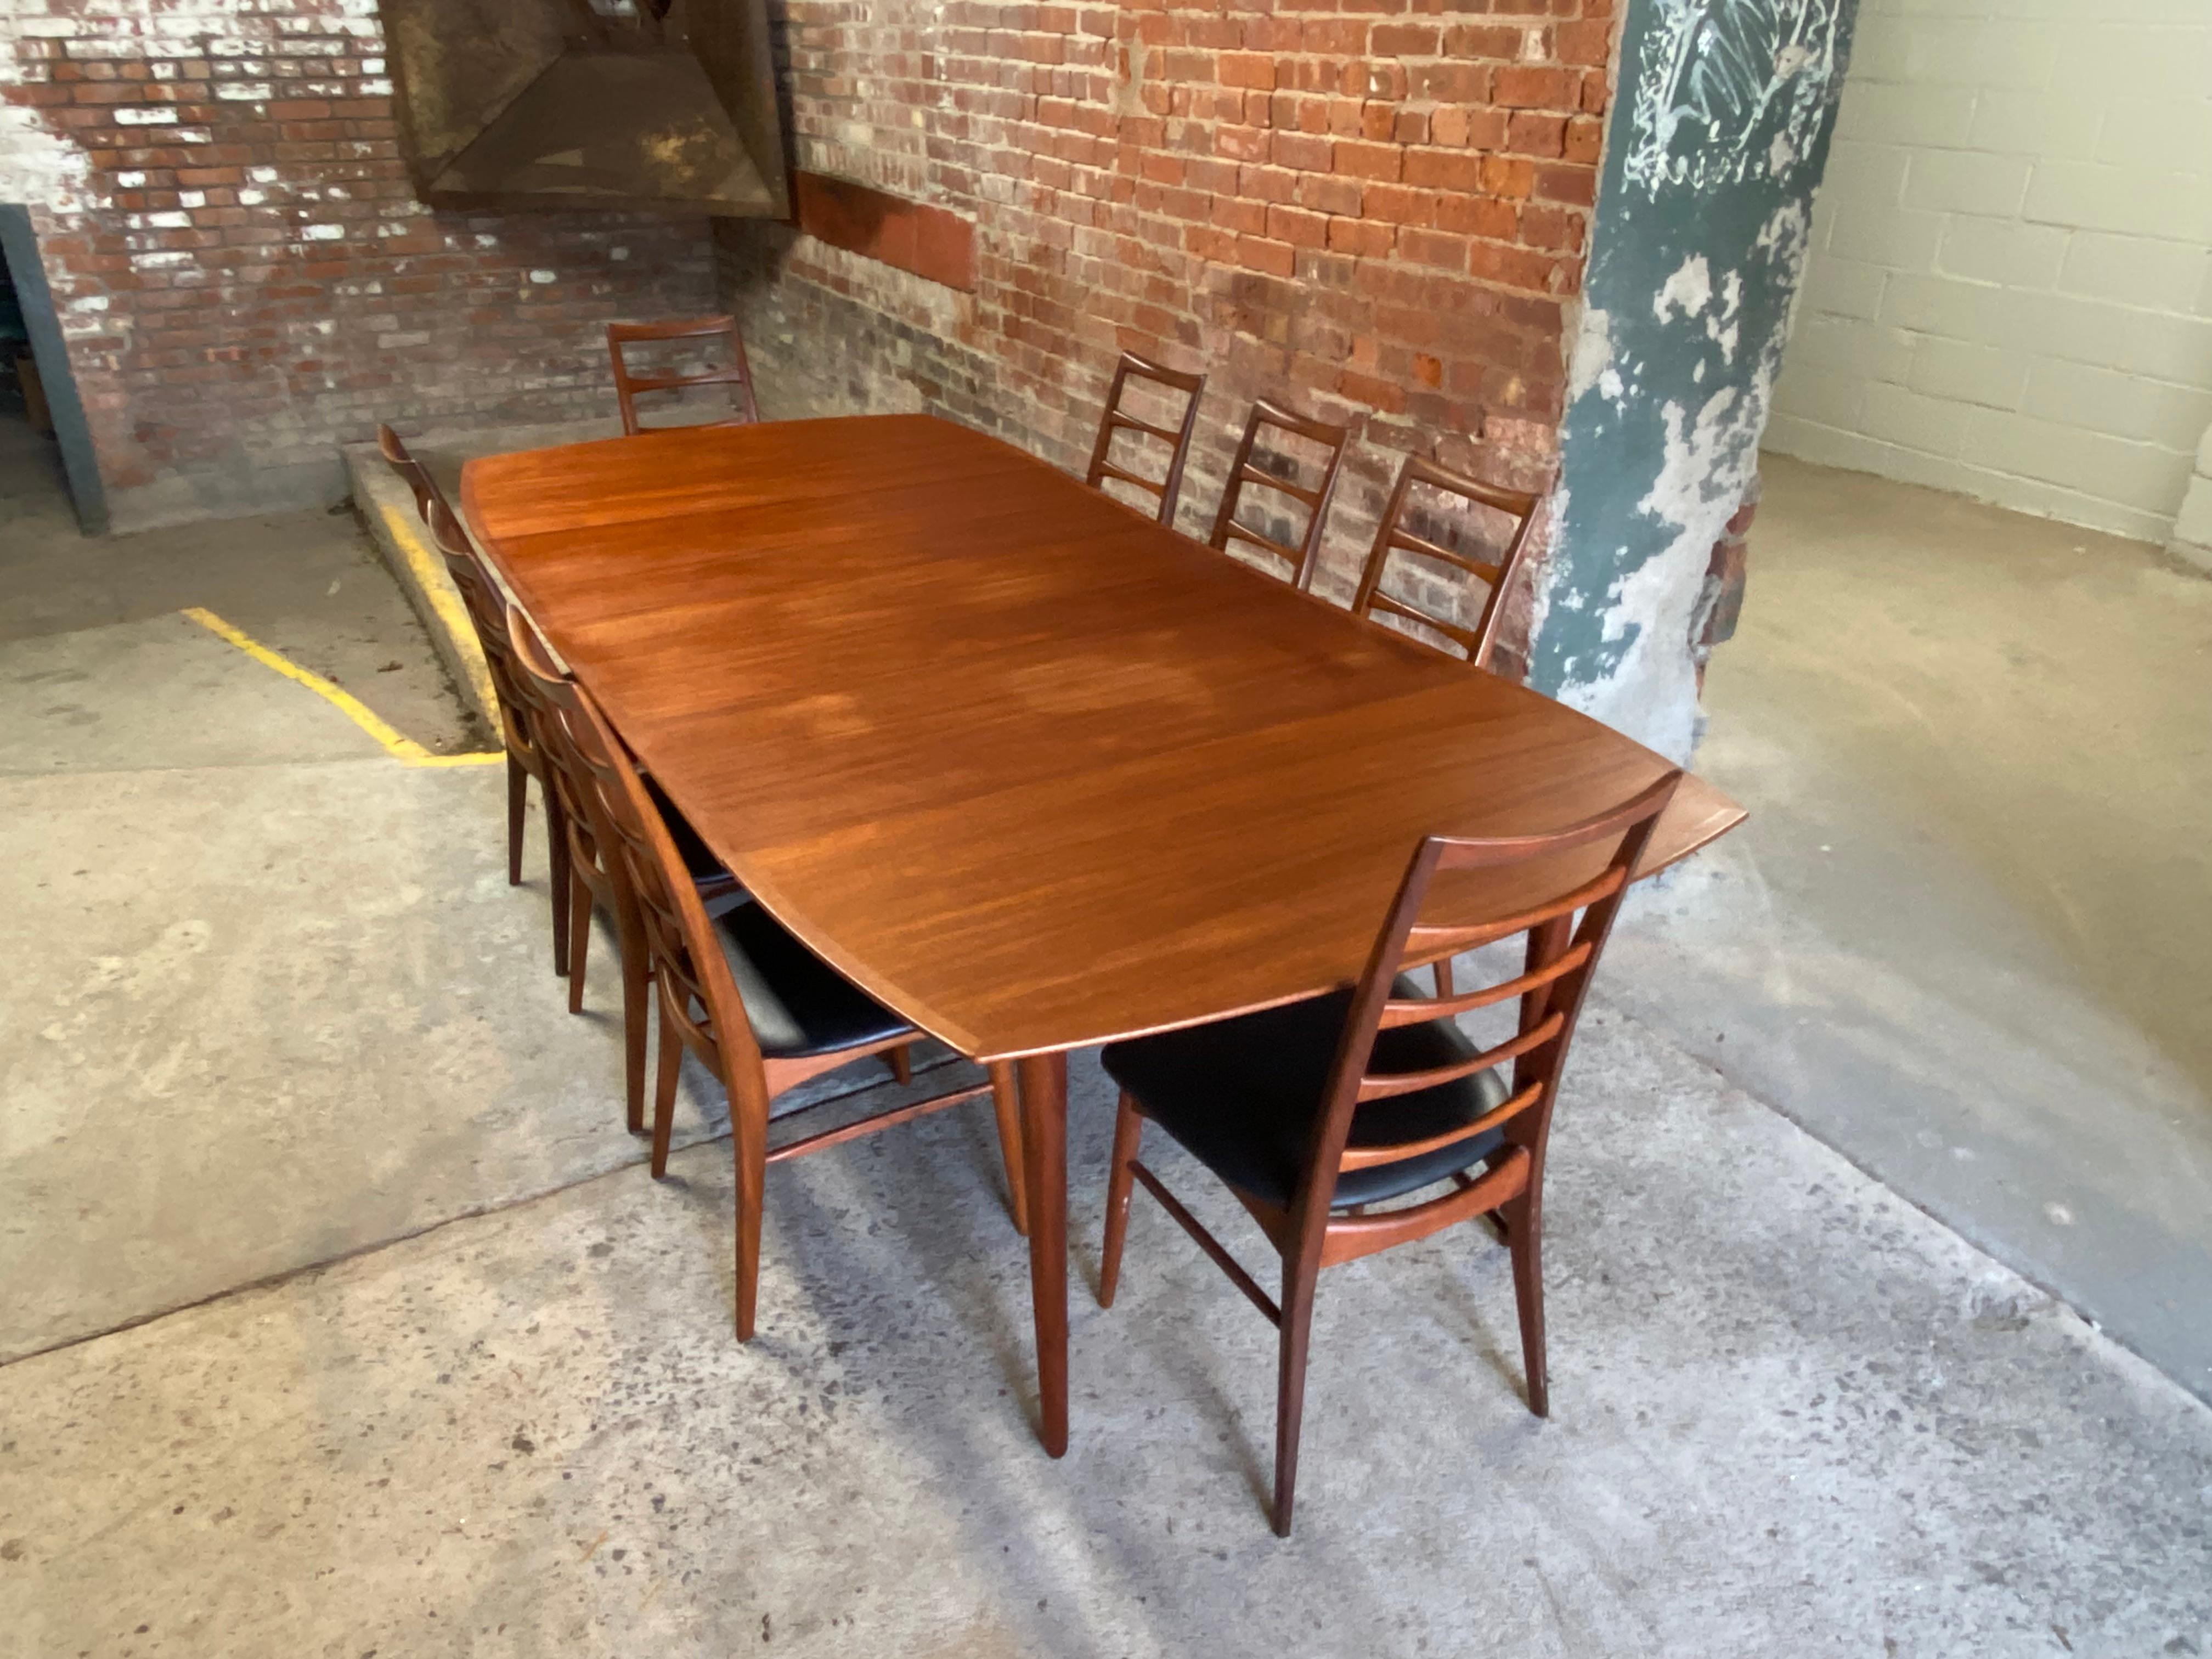 Danish Koefoed Hornslet Lis Chairs and Teak Dining Table